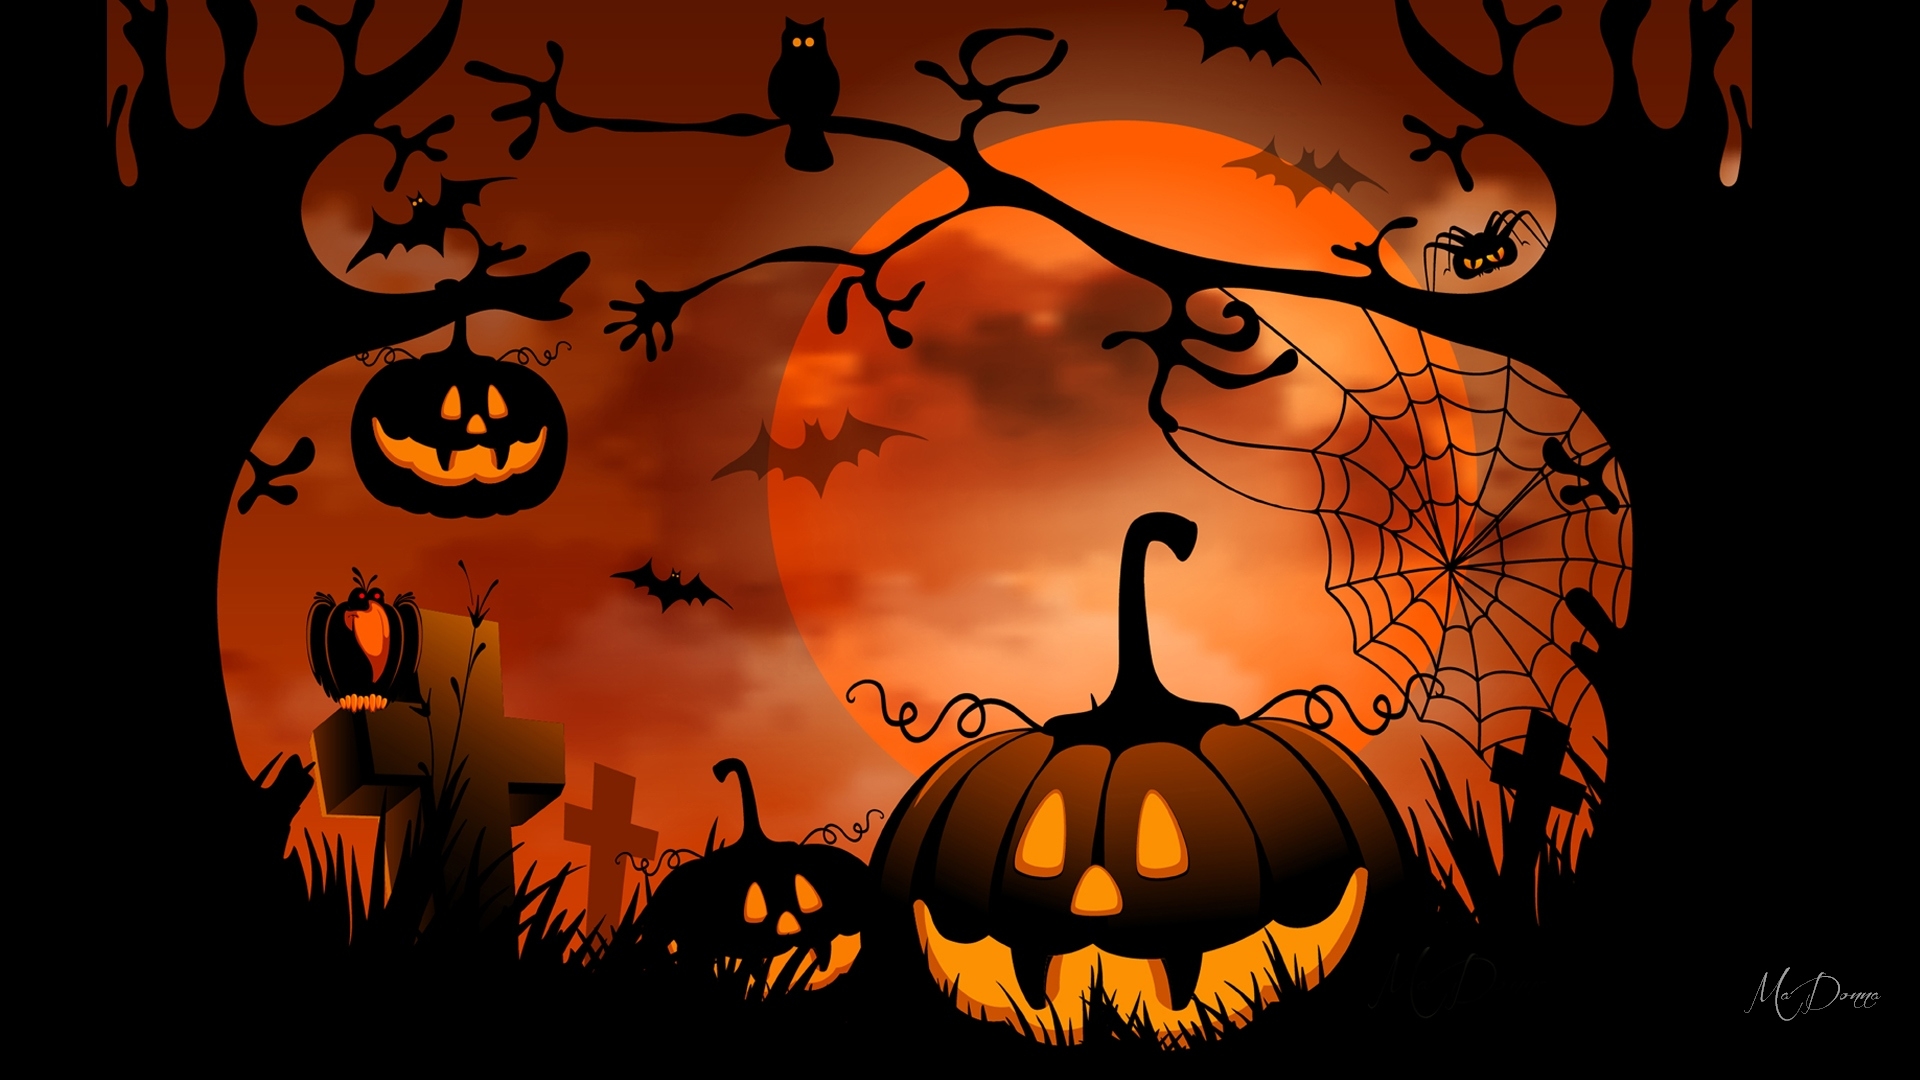 Owls And Spiders Bats Oh My HD Wallpaper Background Image